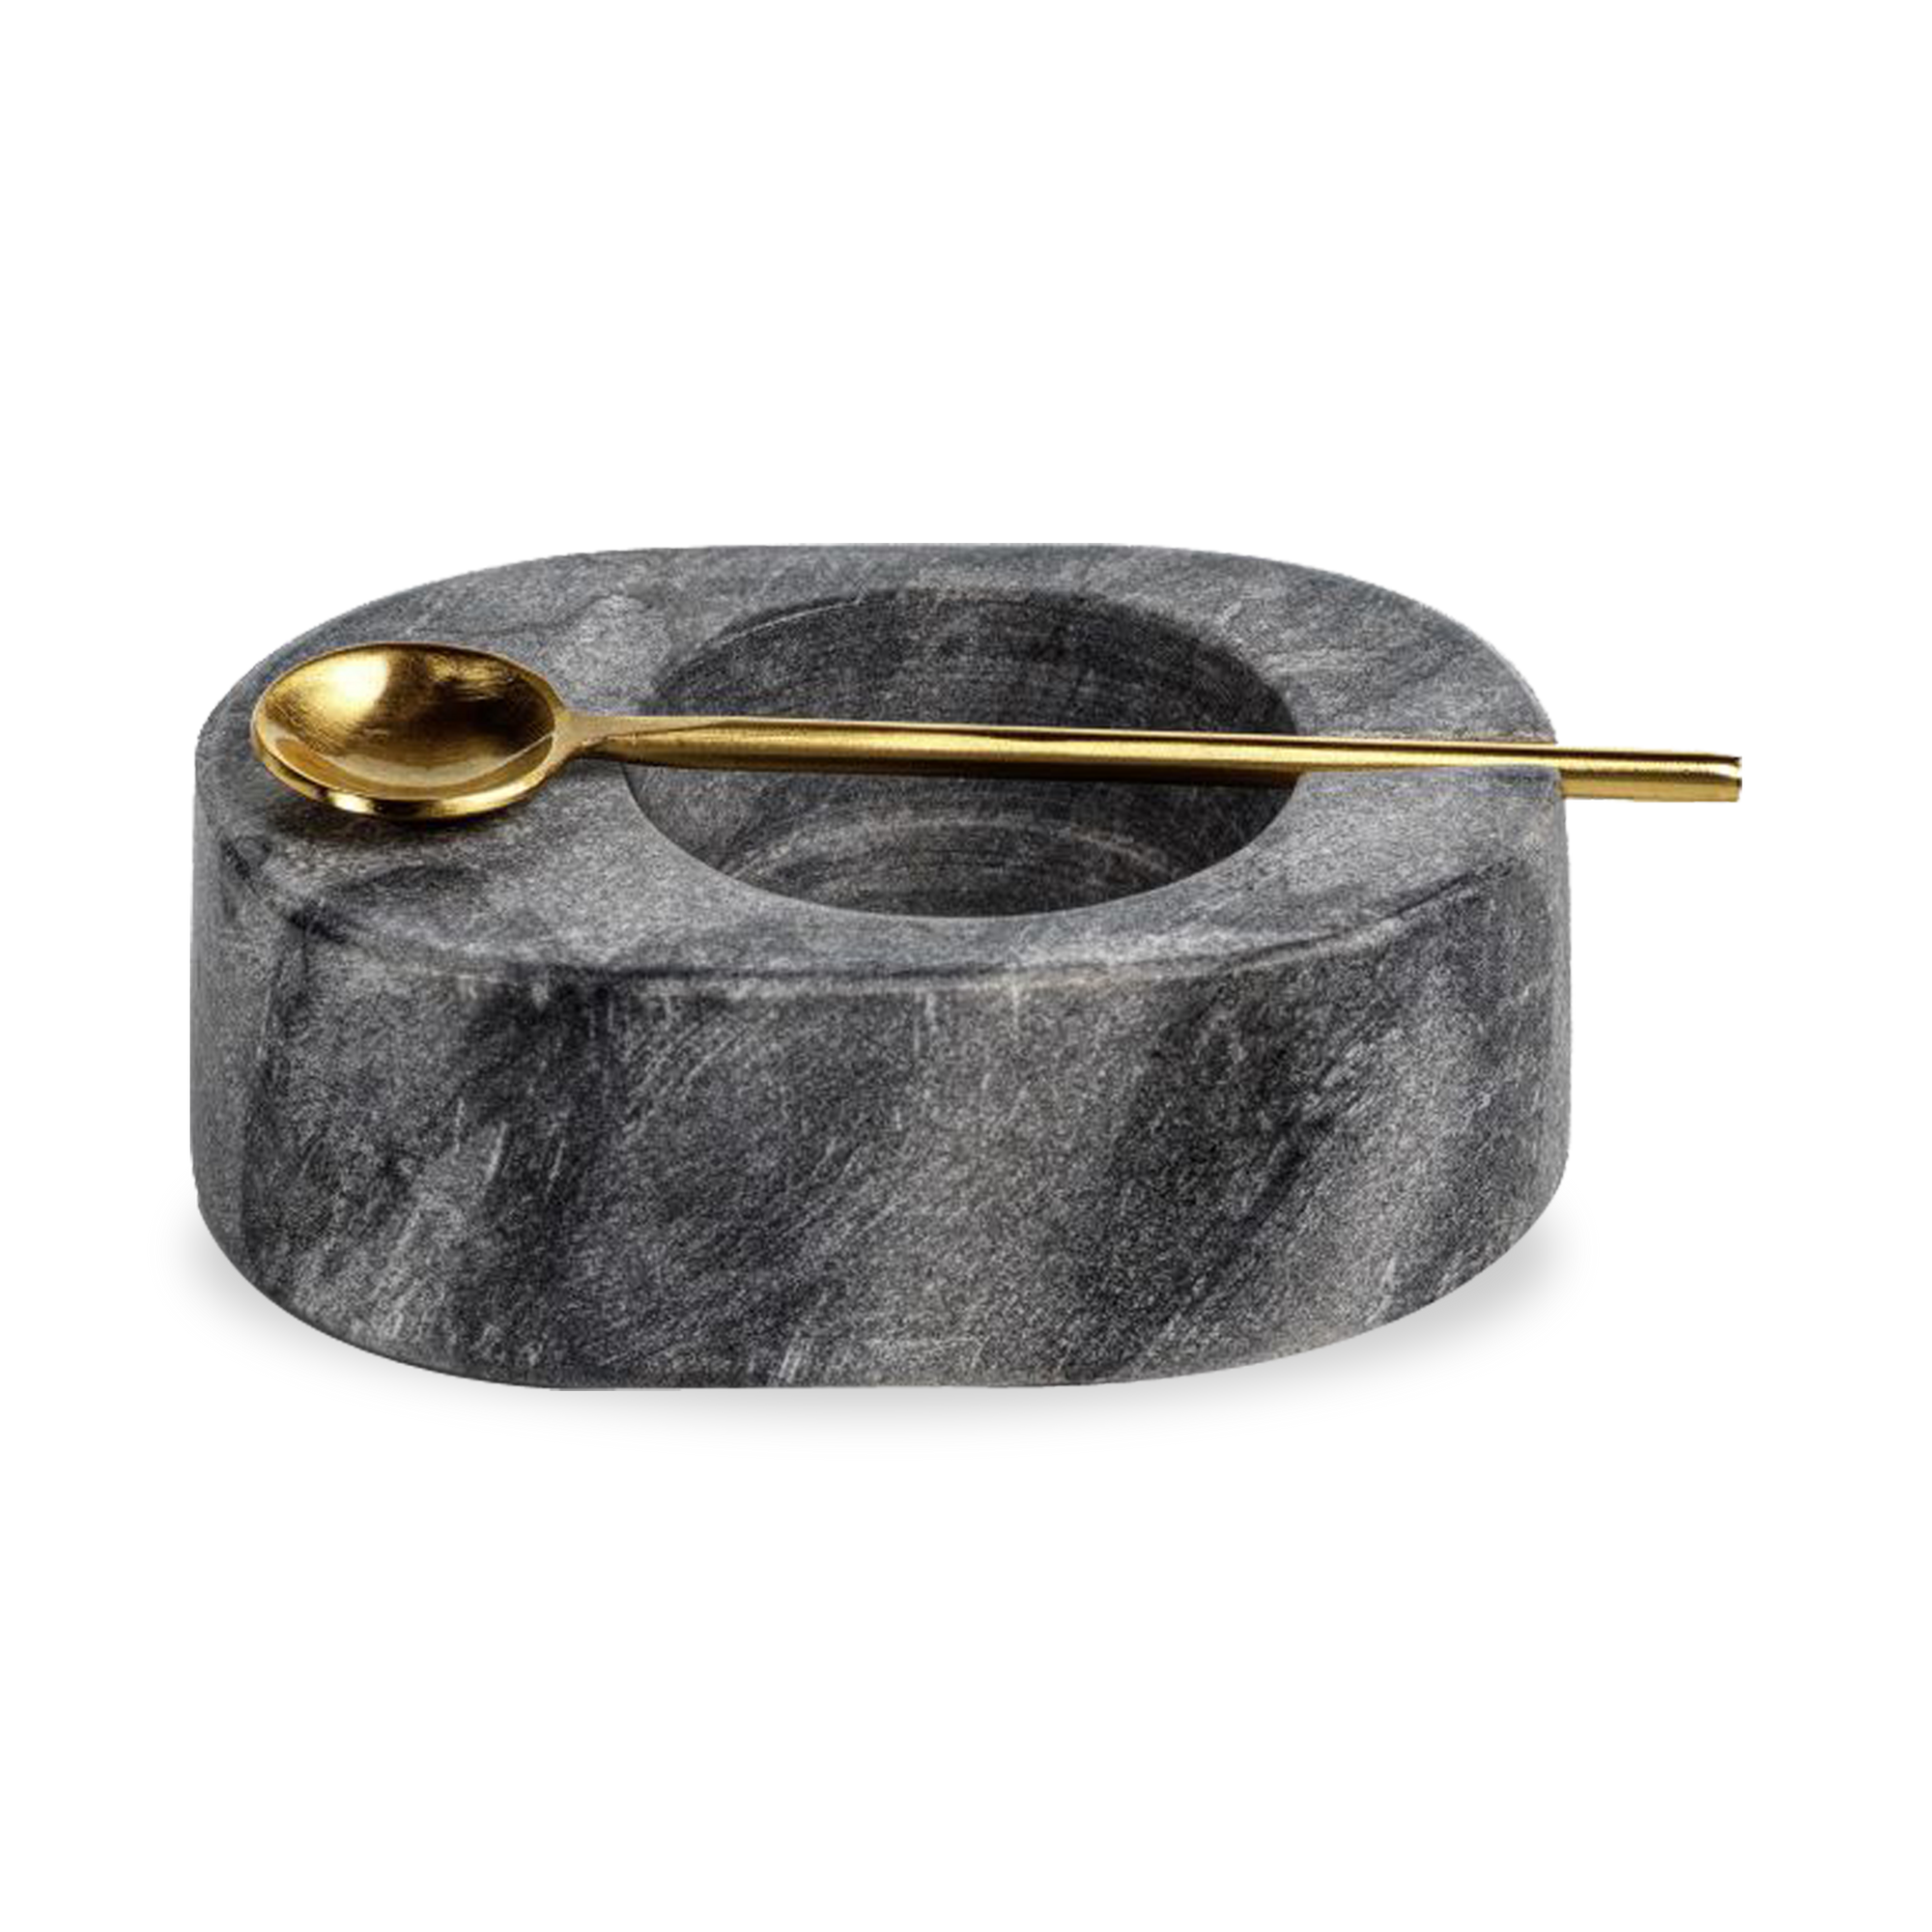 Salt cellar made of grey marble with a gold coloured spoon.